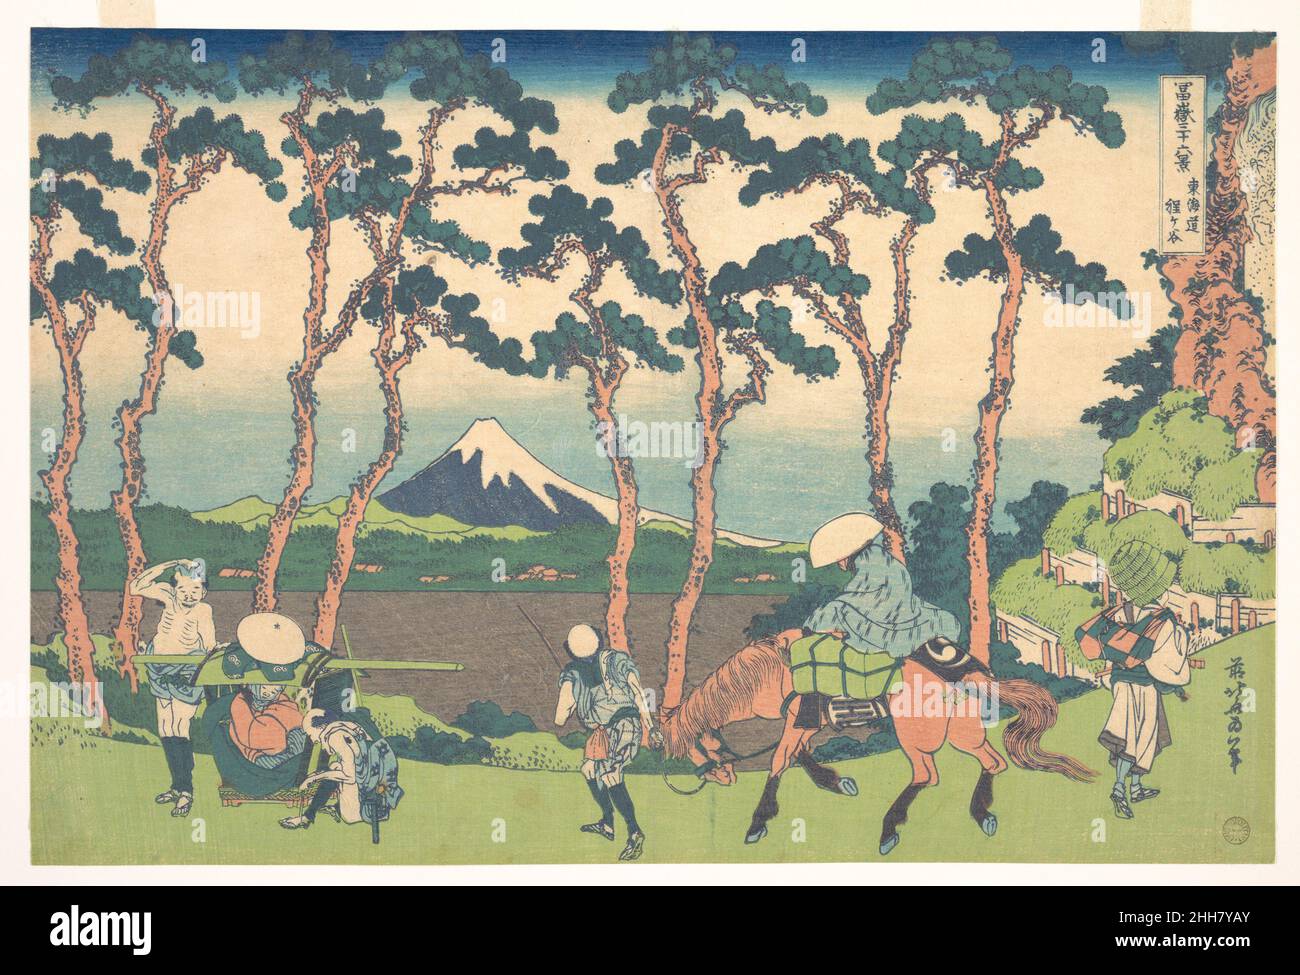 Hodogaya on the Tōkaidō (Tōkaidō Hodogaya), from the series Thirty-six Views of Mount Fuji (Fugaku sanjūrokkei) ca. 1830–32 Katsushika Hokusai Japanese Mount Fuji is enclosed by old pine trees that were planted along the highway as shade and shelter for the travelers. The location of this scene is probably the Gondazaka and Shinanozaka, hills that border the Musashi and Sagami provinces. Palanquin bearers at the left are resting after having crossed the hill. The trappings of the horse carry the trademark of the publisher and the character ju from the publisher's name of Eijudo.. Hodogaya on t Stock Photo